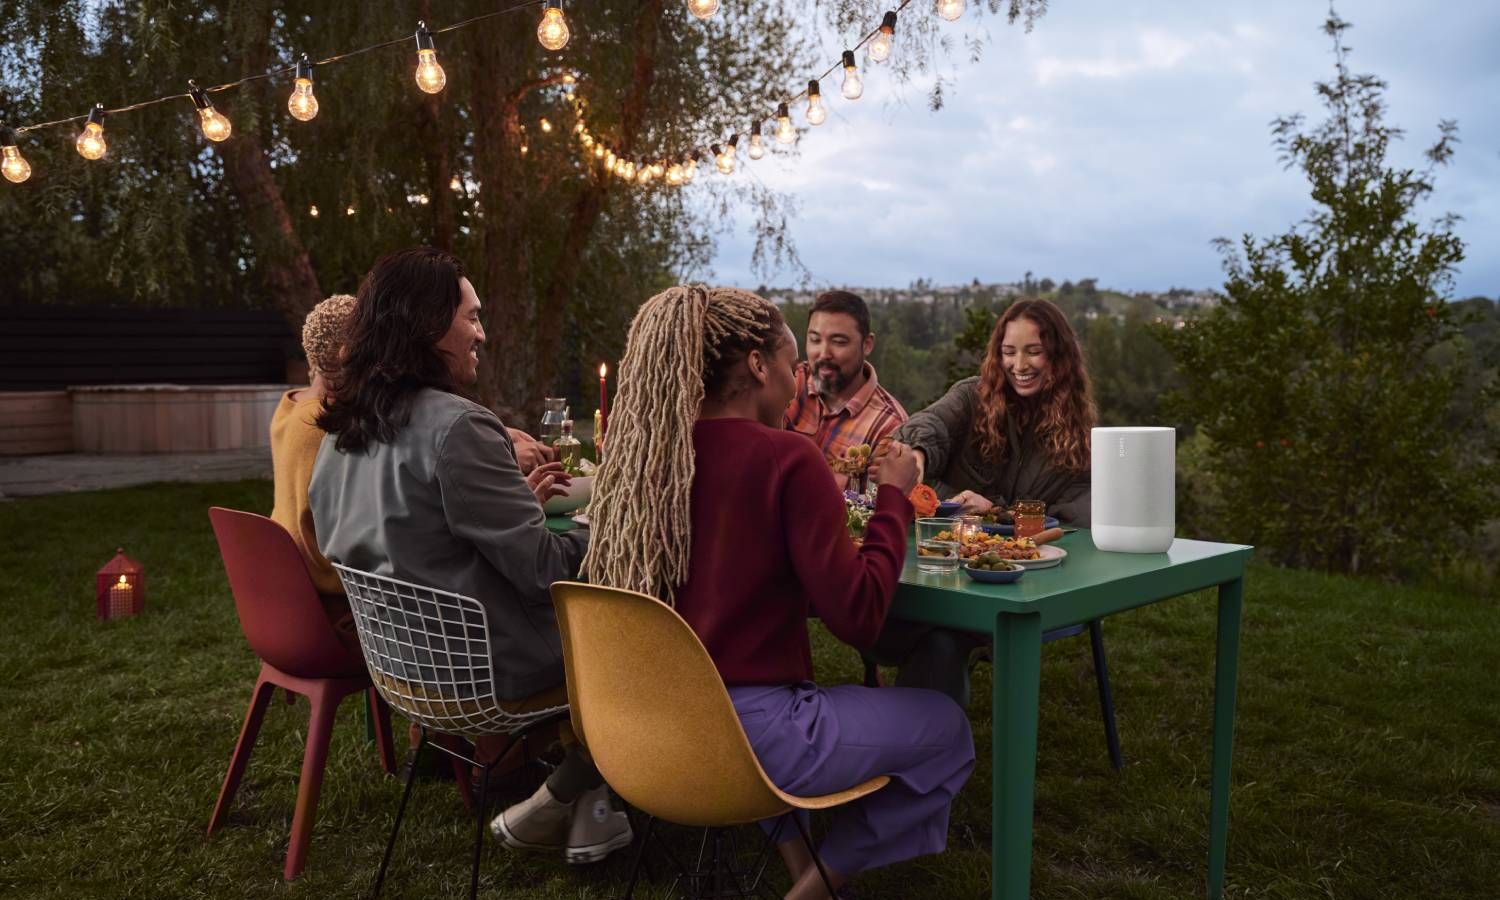 Group of people eating outside while listening to portable sonos speaker